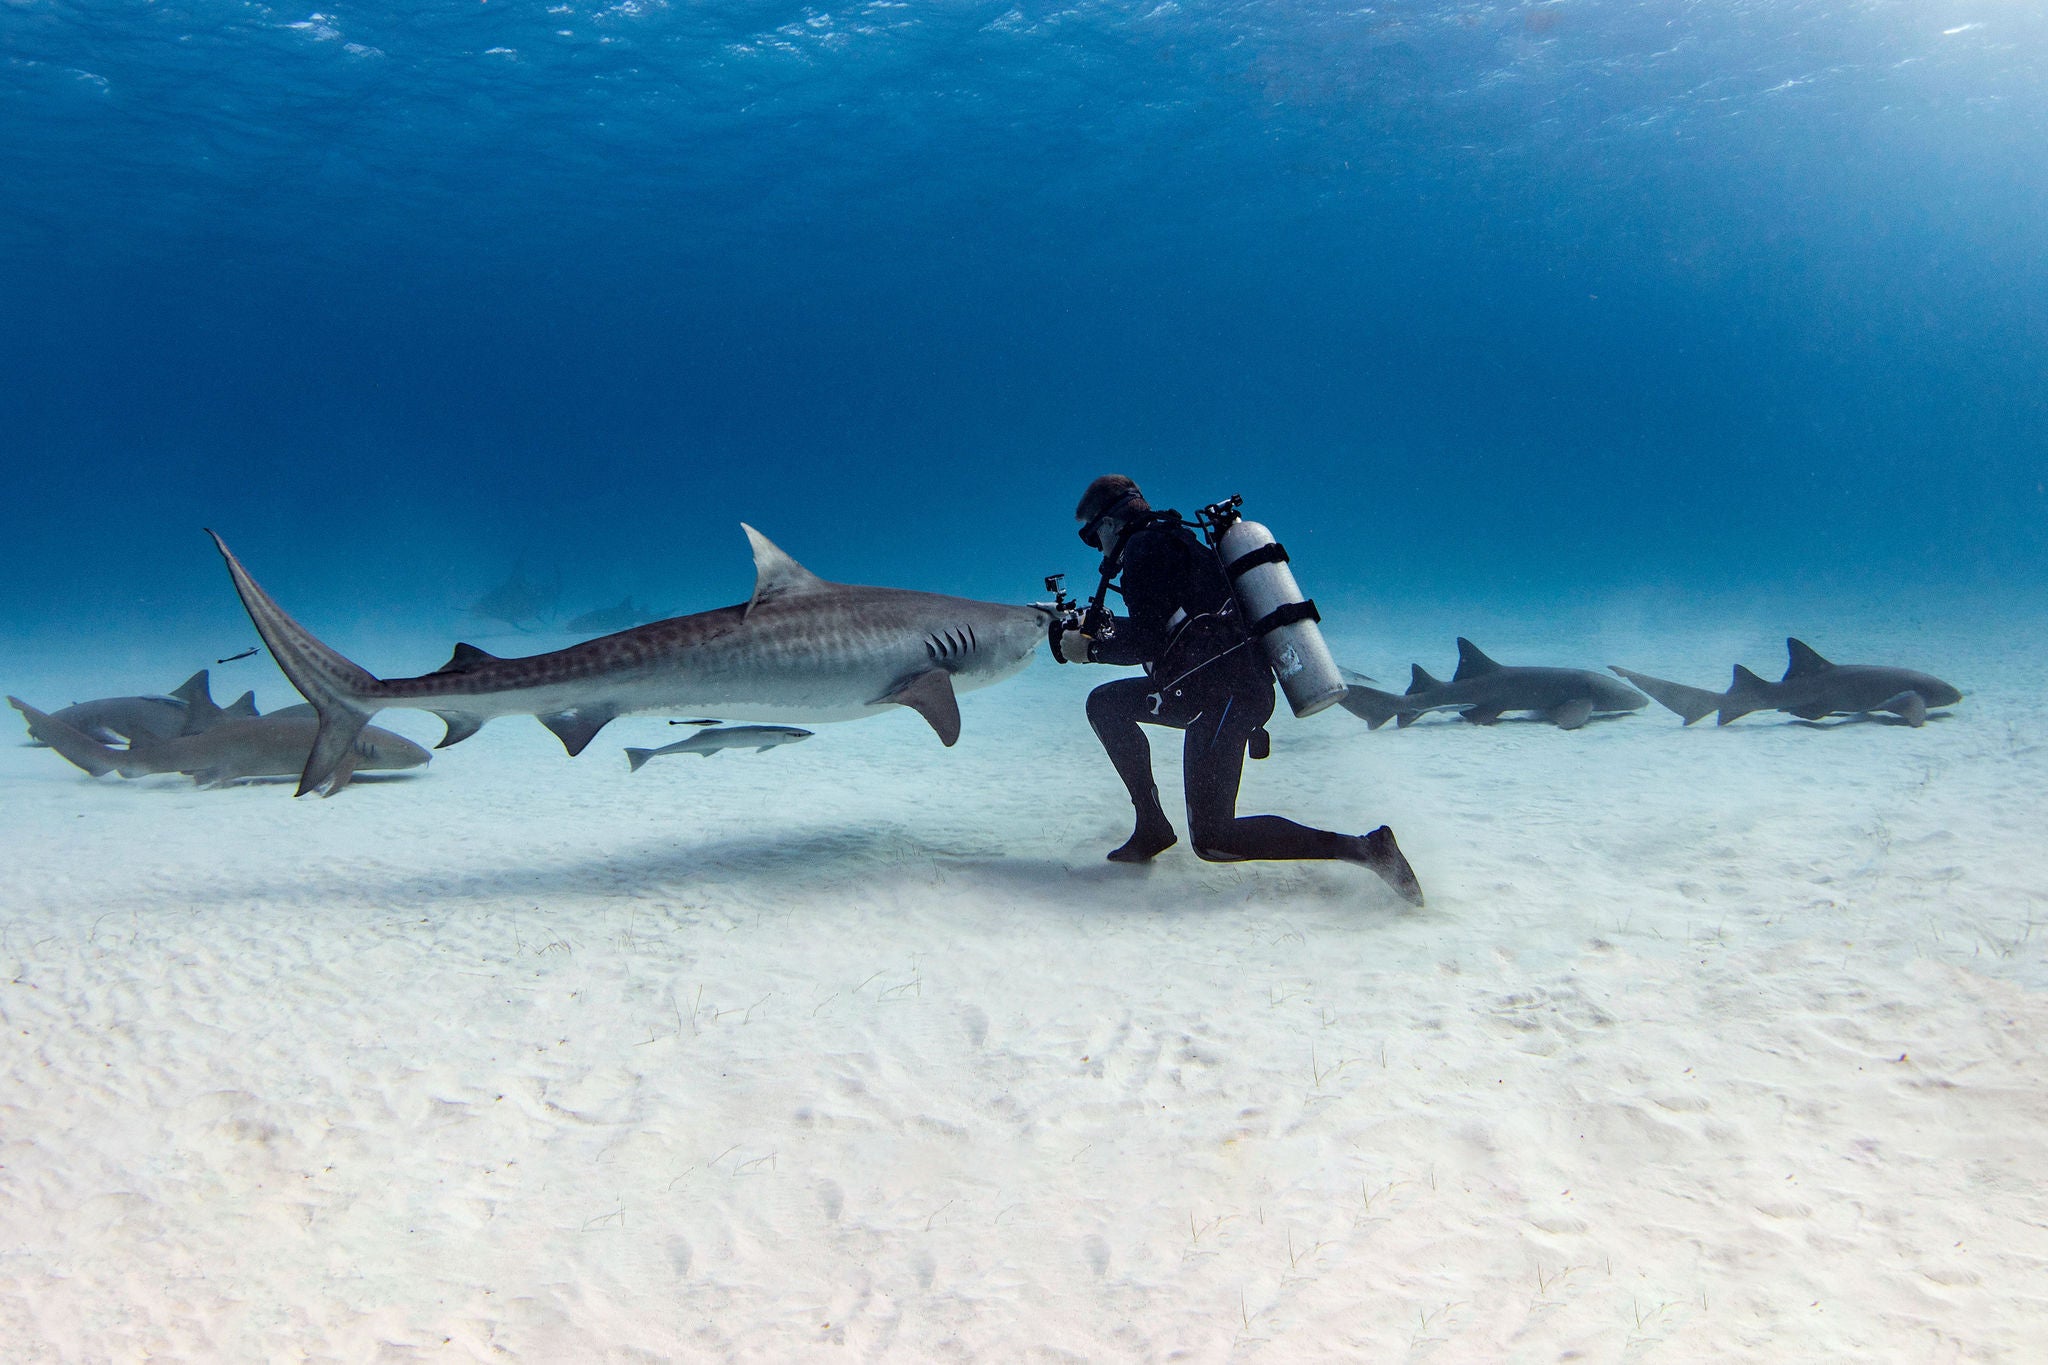 Scuba diver diving underwater with shark